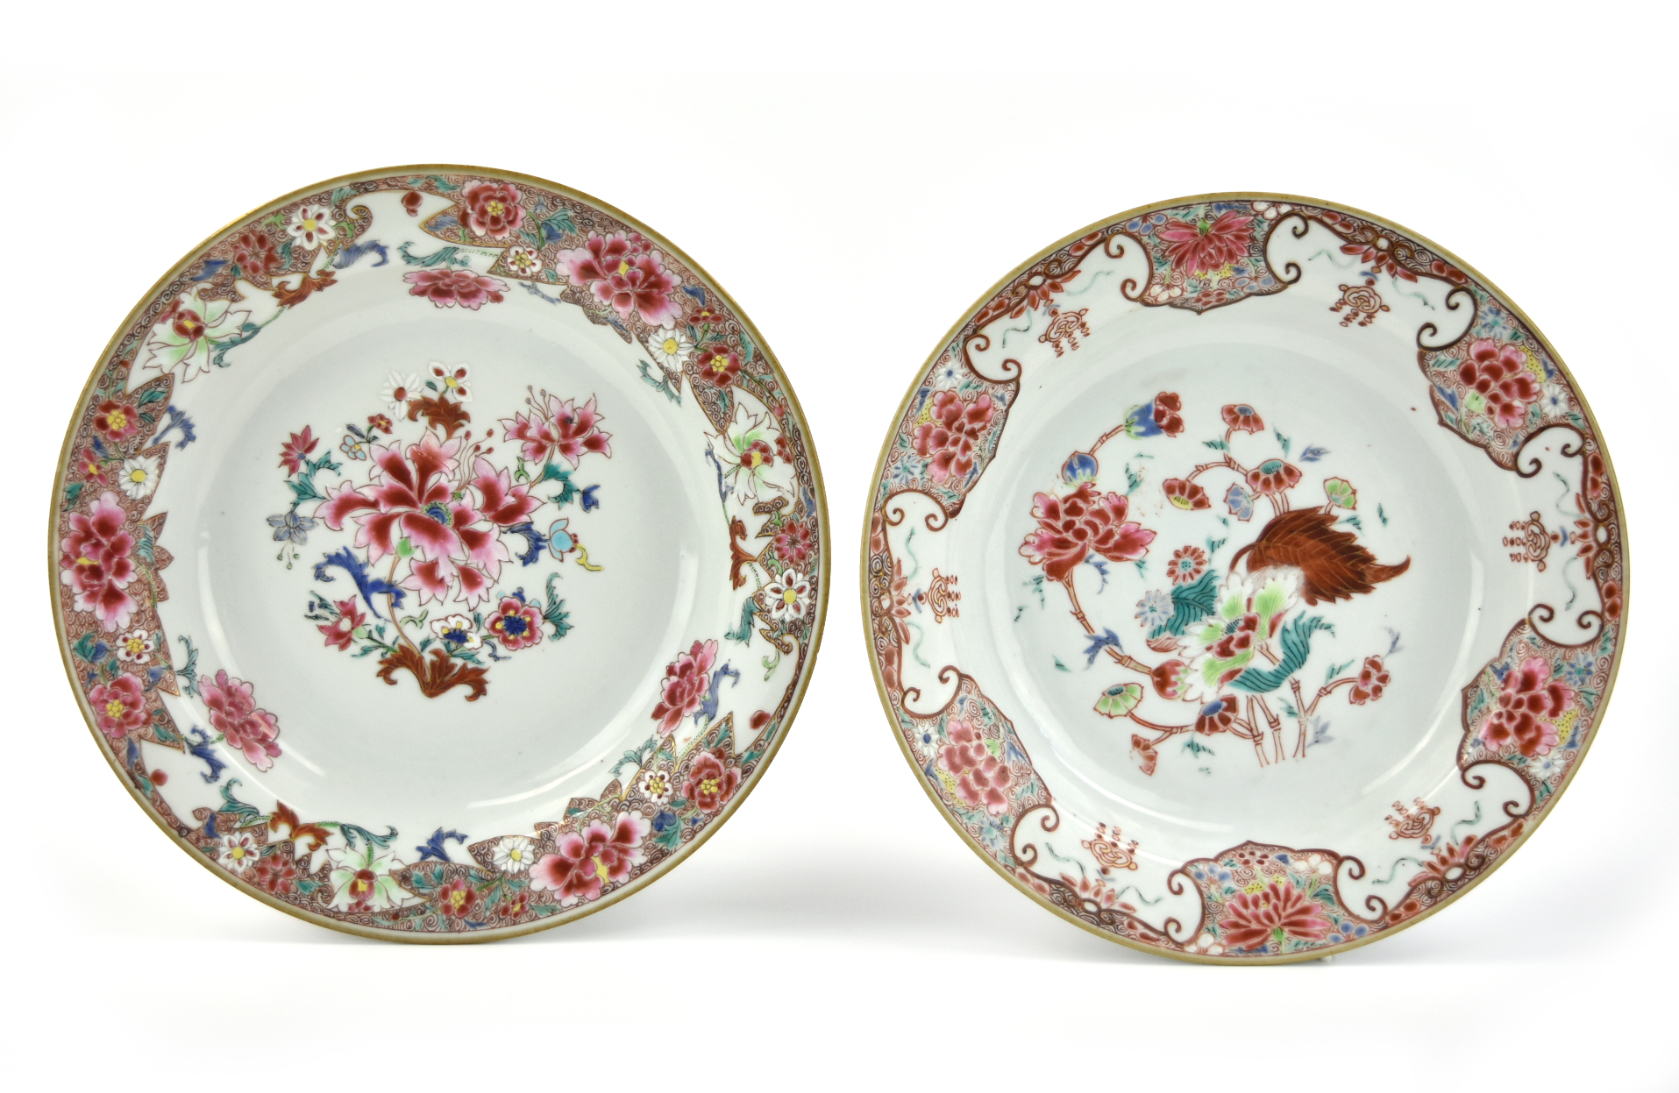 PAIR OF CHINESE EXPORT PLATE, YONGZHENG